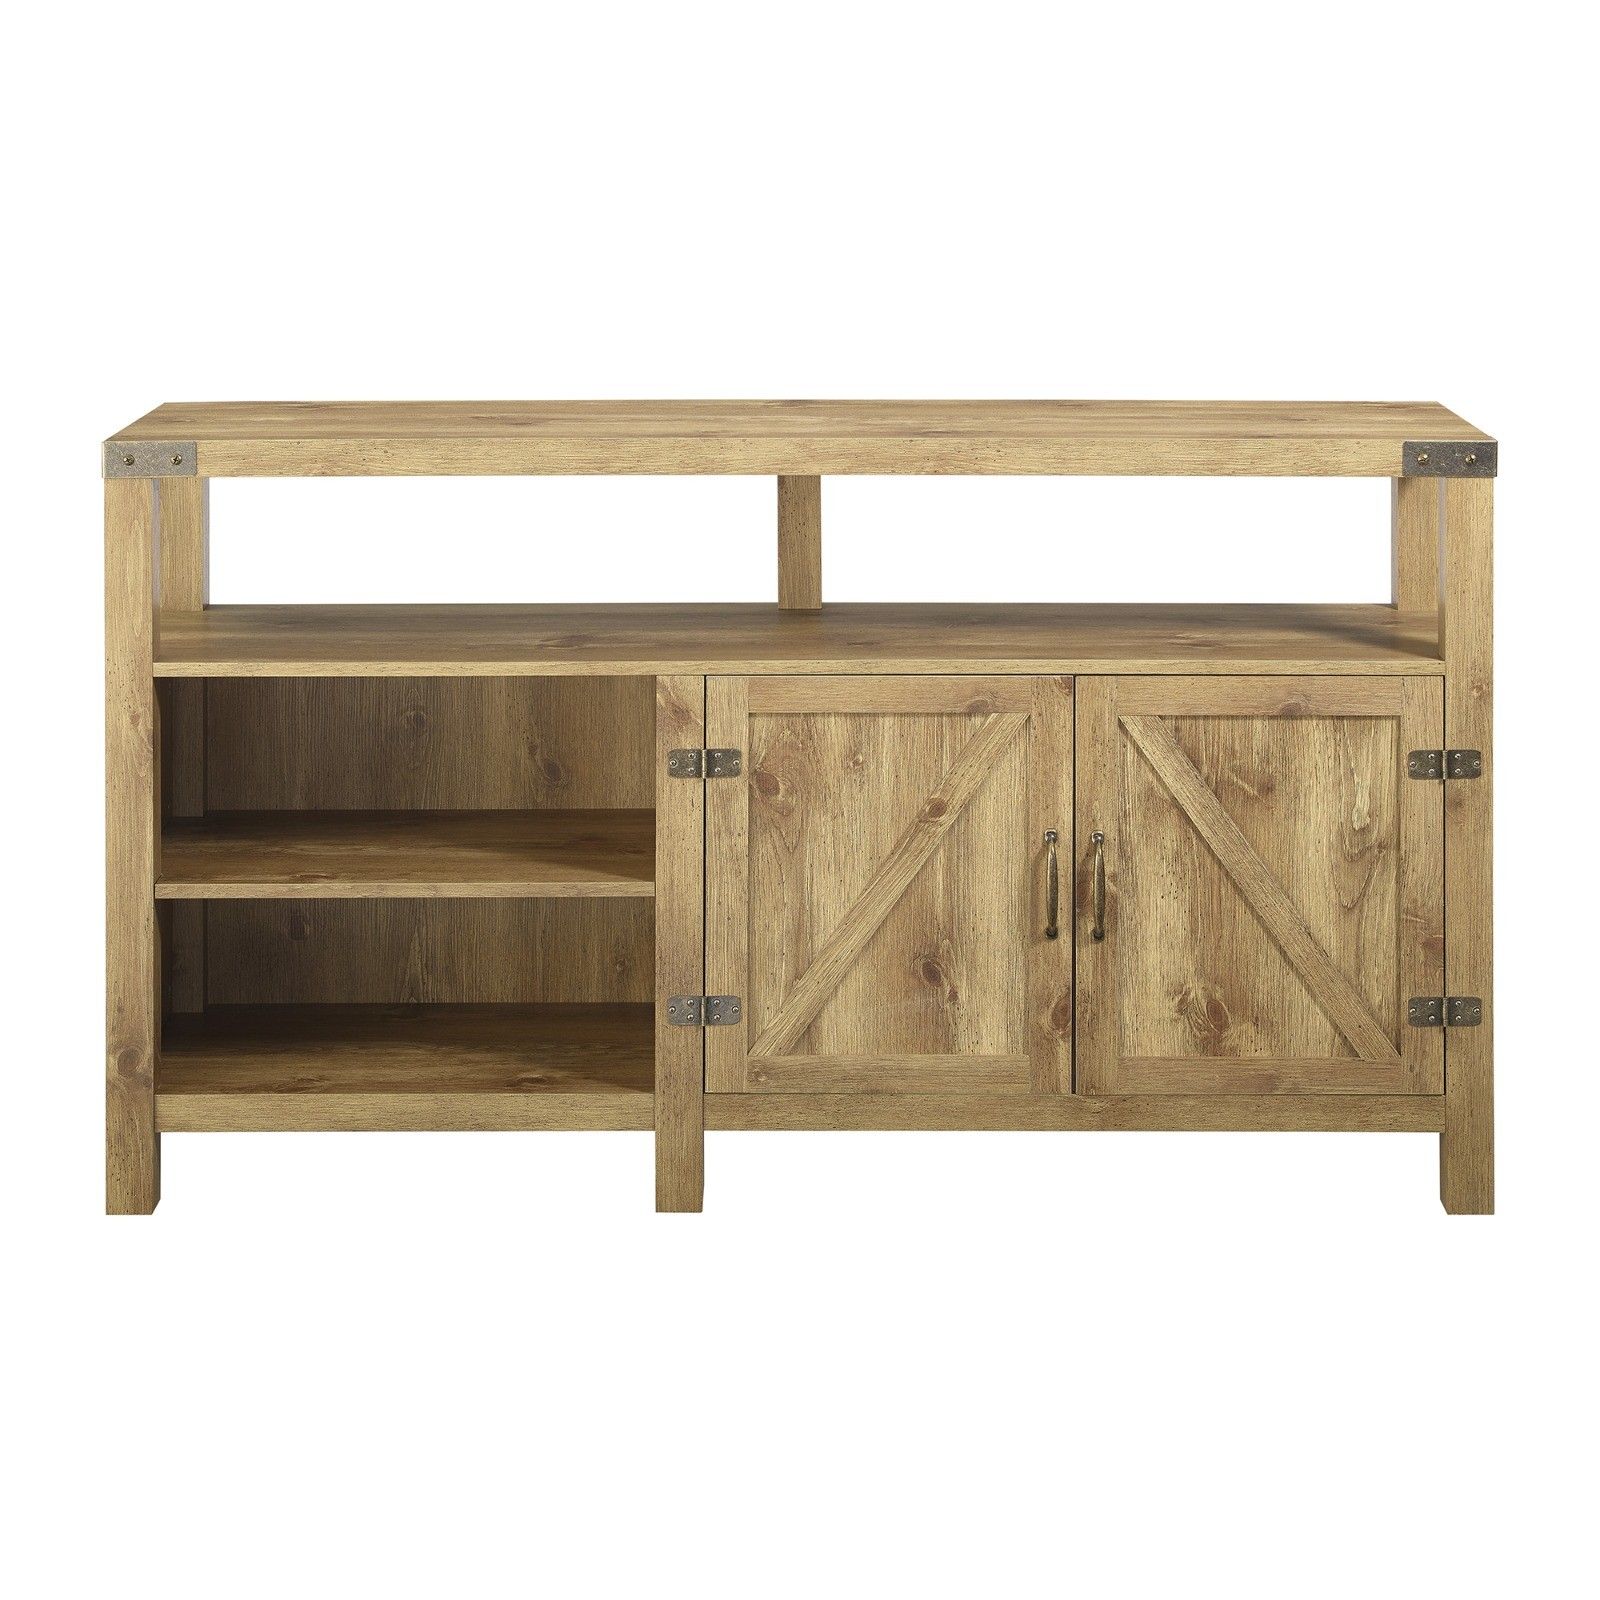 .Manor Park Modern Farmhouse TV Stand for TVs up to 65", Barnwood